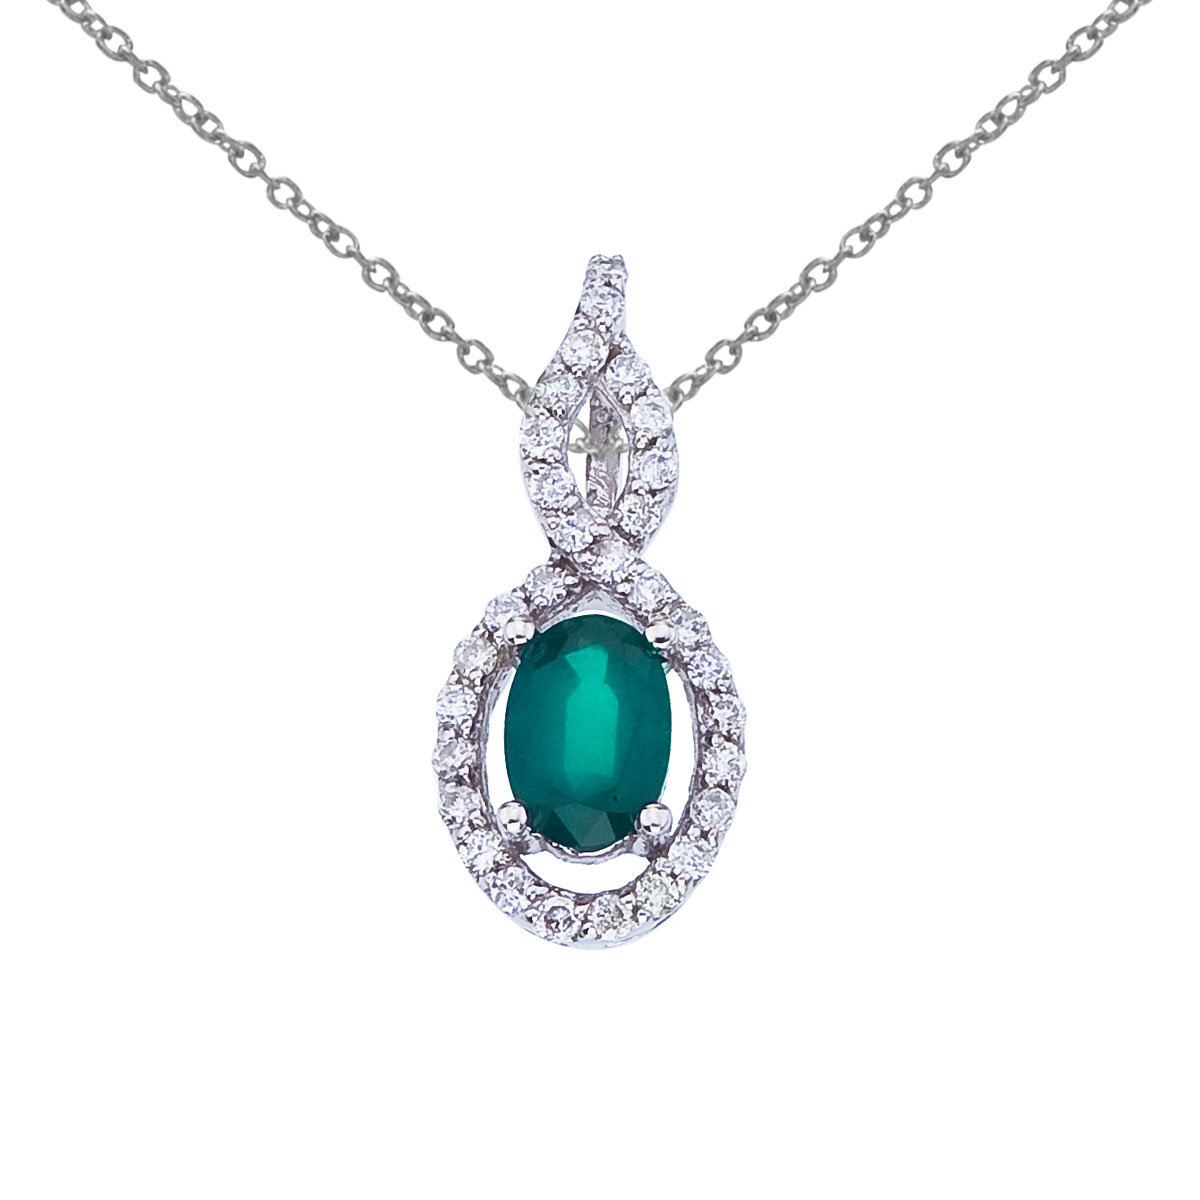 Luminous 6x4 mm emerald pendant surrounded by .18 total ct diamonds set in 14k white gold.